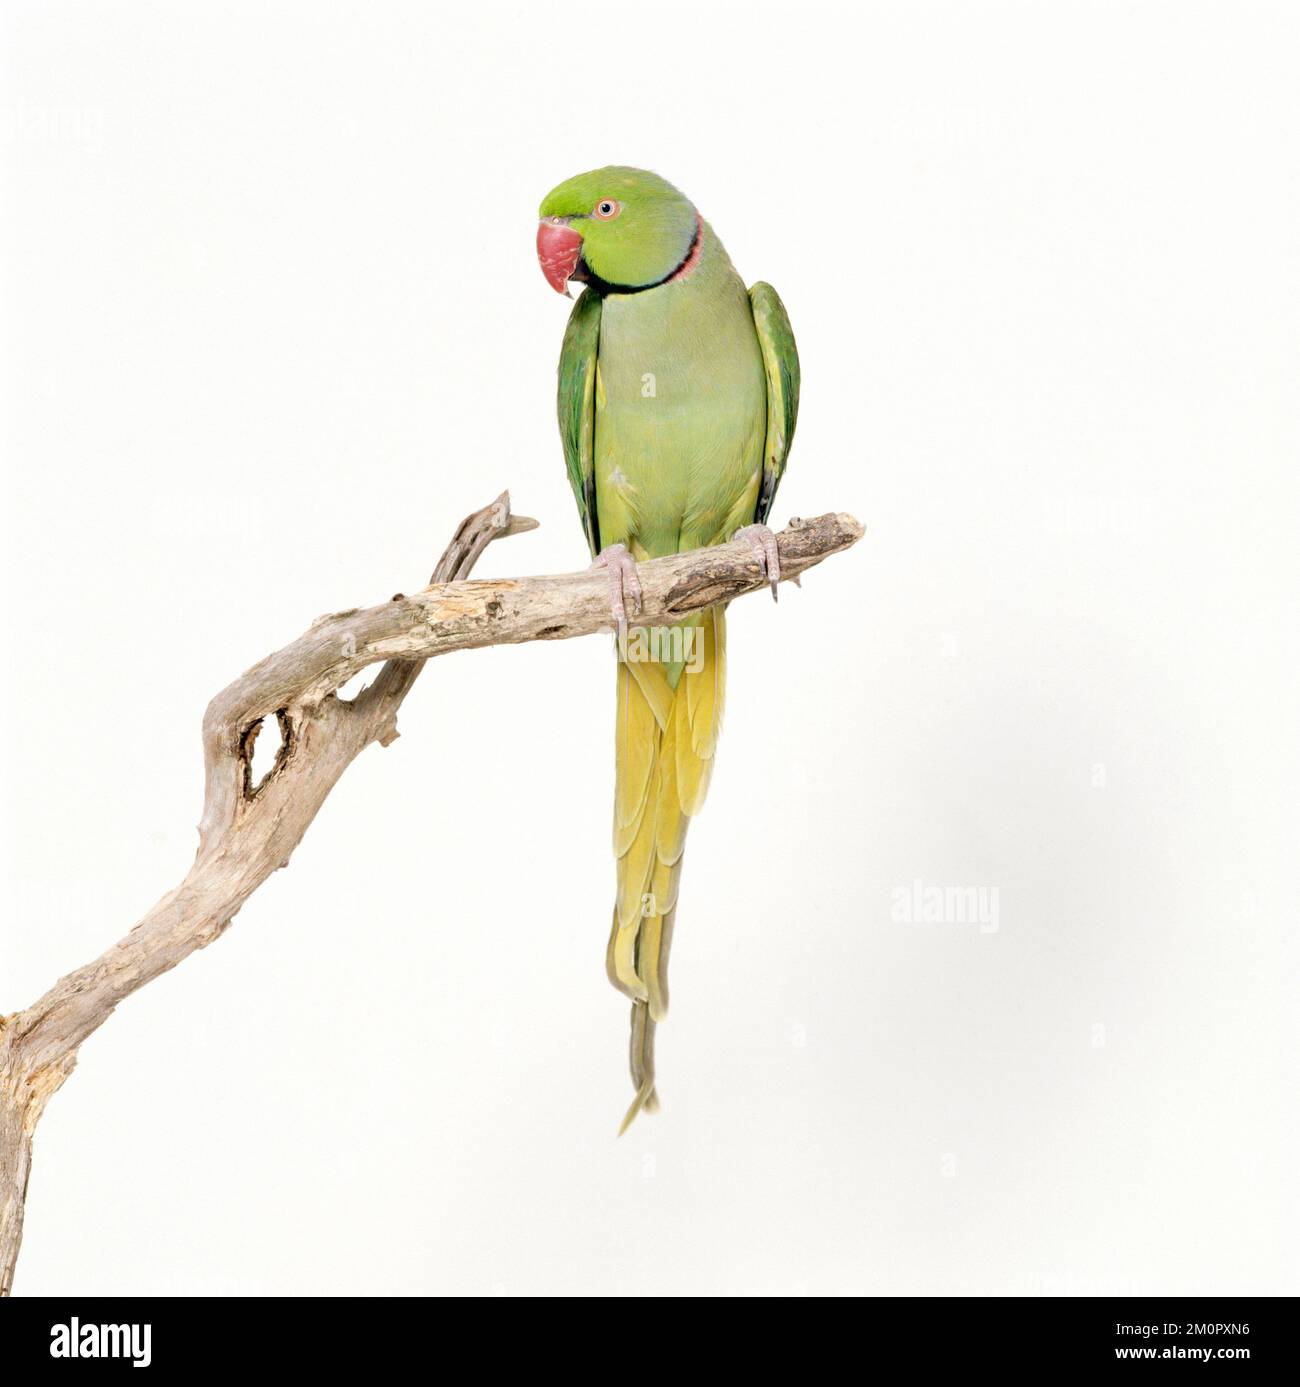 Panchi - Name: Green Ring-Neck Parakeet Also Known as: Rose Ringed Parakeet  Specialty: It is one of four recognized subspecies of Ring-necked Parakeets  - and is the most commonly kept in captivity.